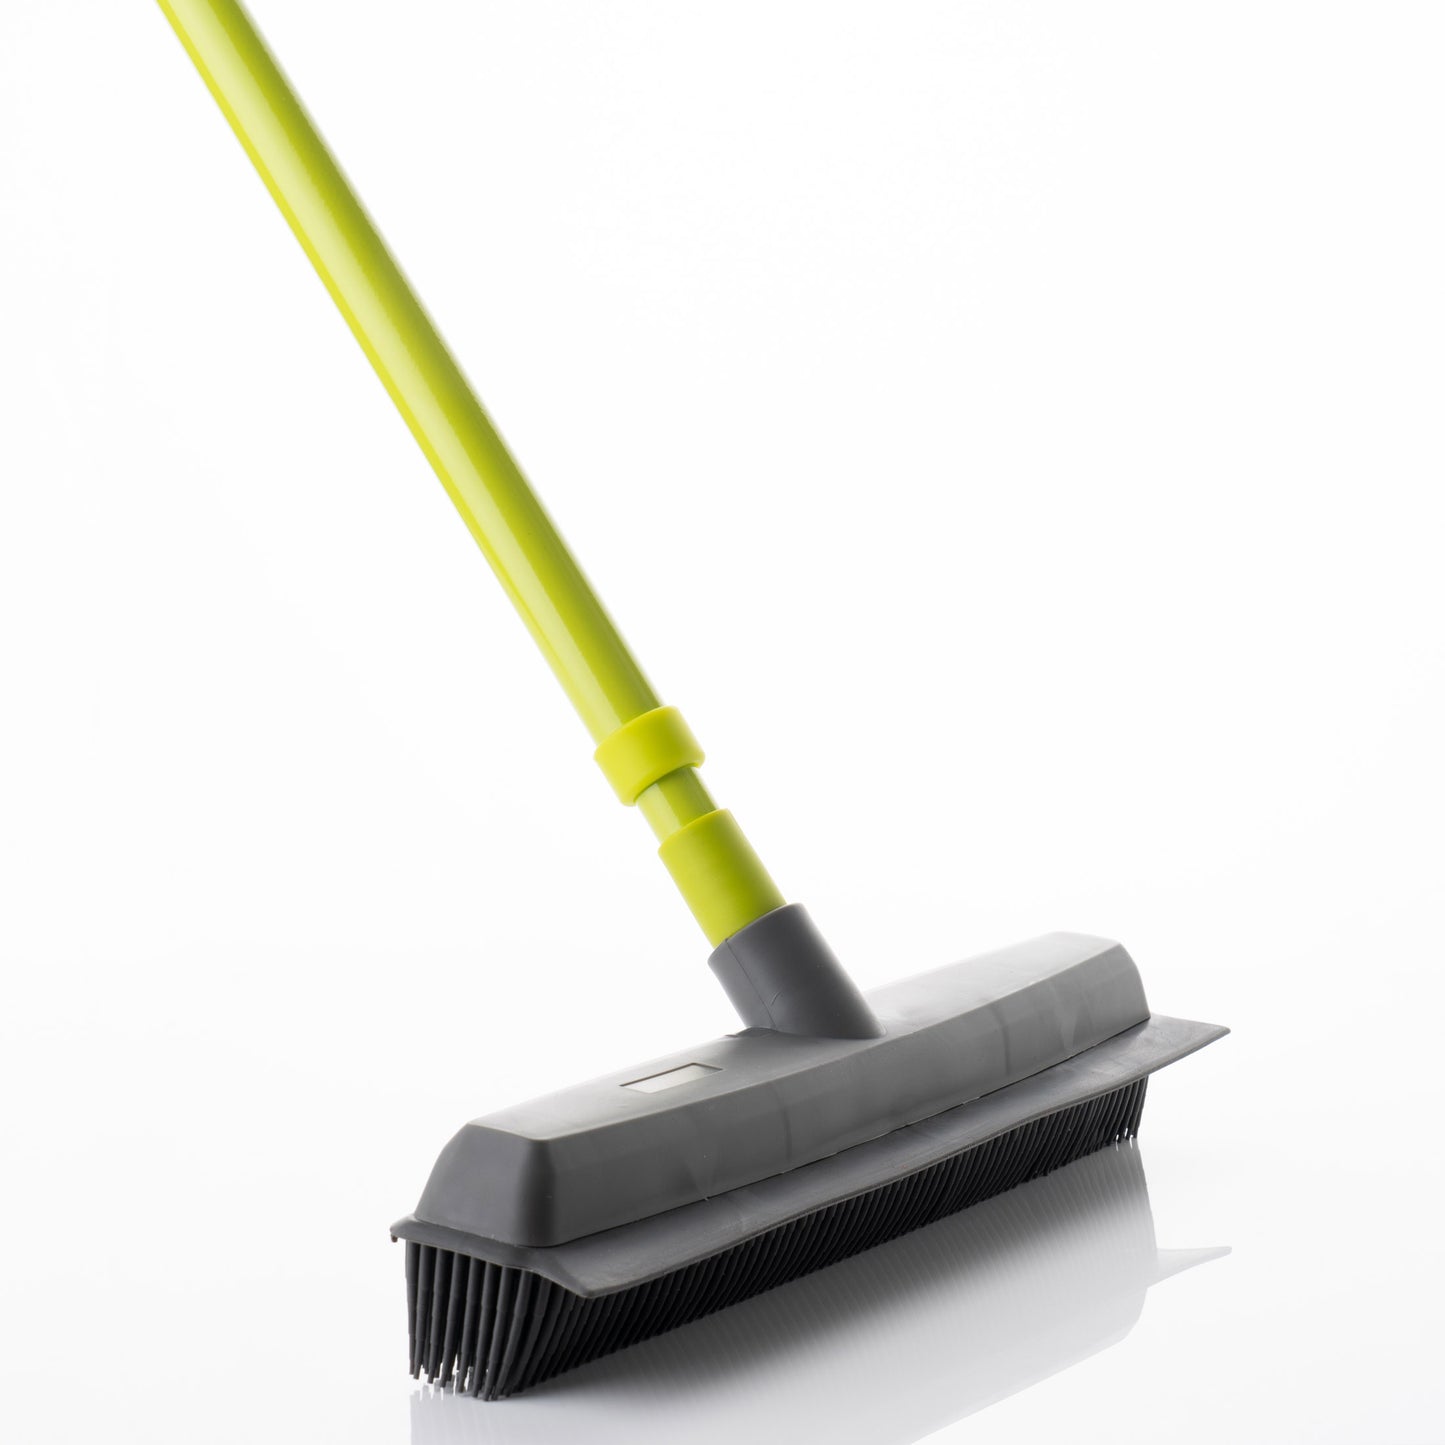 Push Broom with Squeegee (Case of 16)